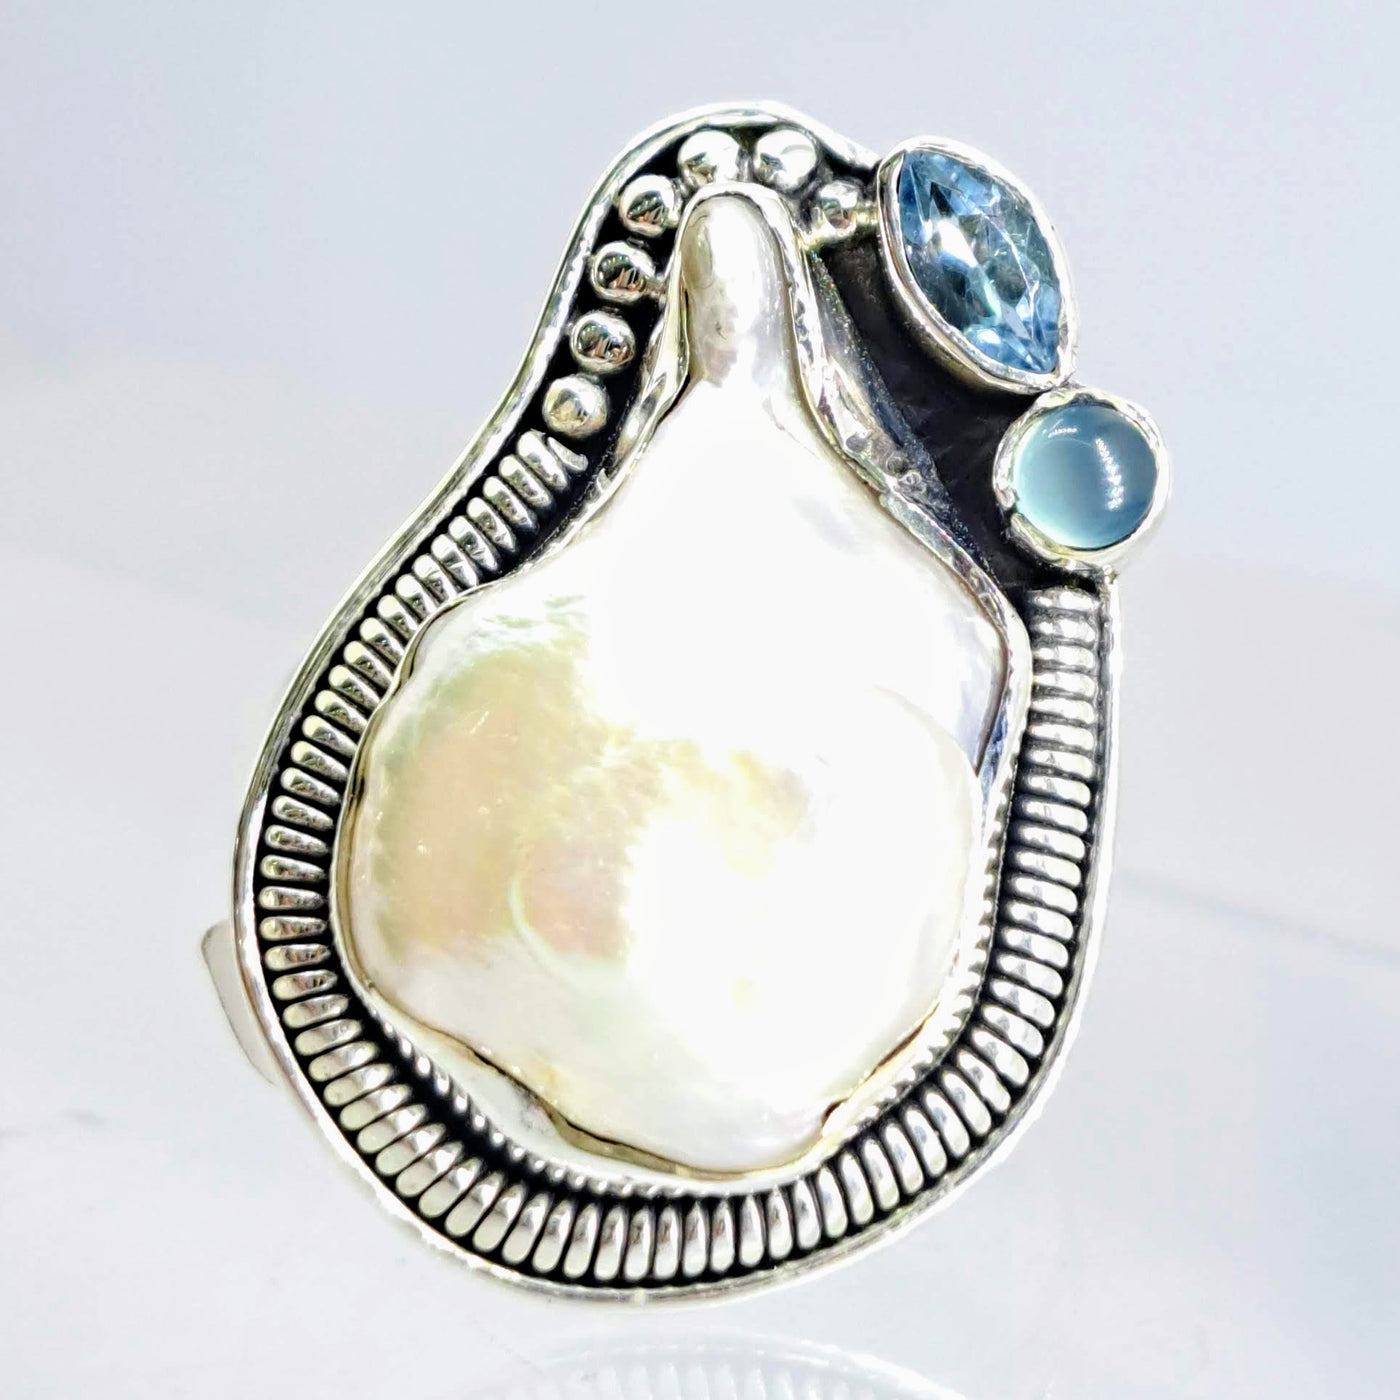 "Icing On The Cake" Sz 9 Ring - Pearl, Chalcedony, Topaz, Sterling